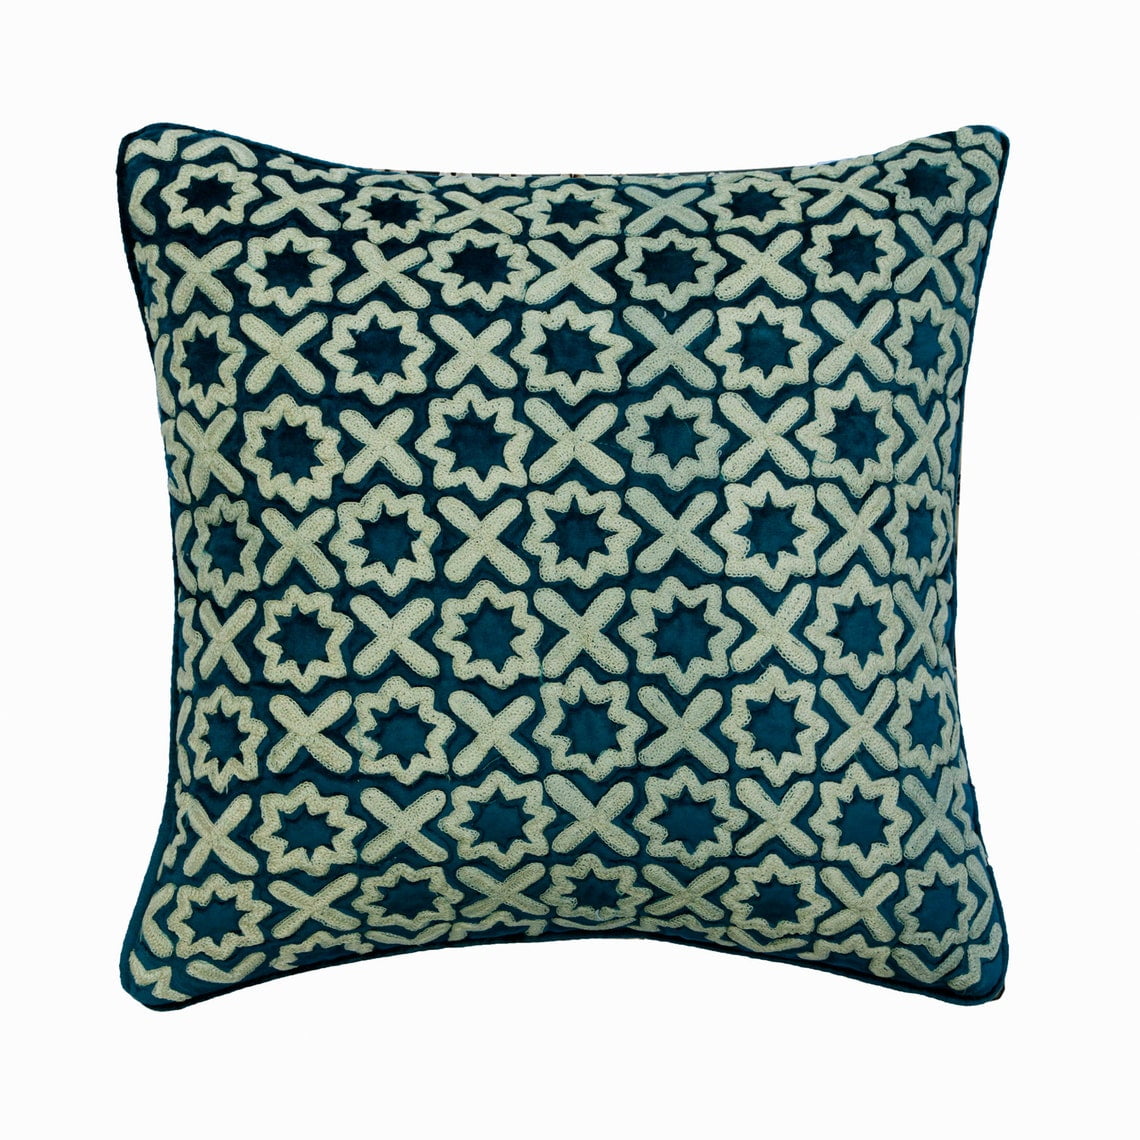 Chair Cushion Cover, Pillow Covers, Decorative Pillow Covers 18x18 inch  (45x45 cm) Blue, Cotton Throw Pillow Covers, Handmade Pillow Covers,  Traditional, Animal Print - Blue Elephant 